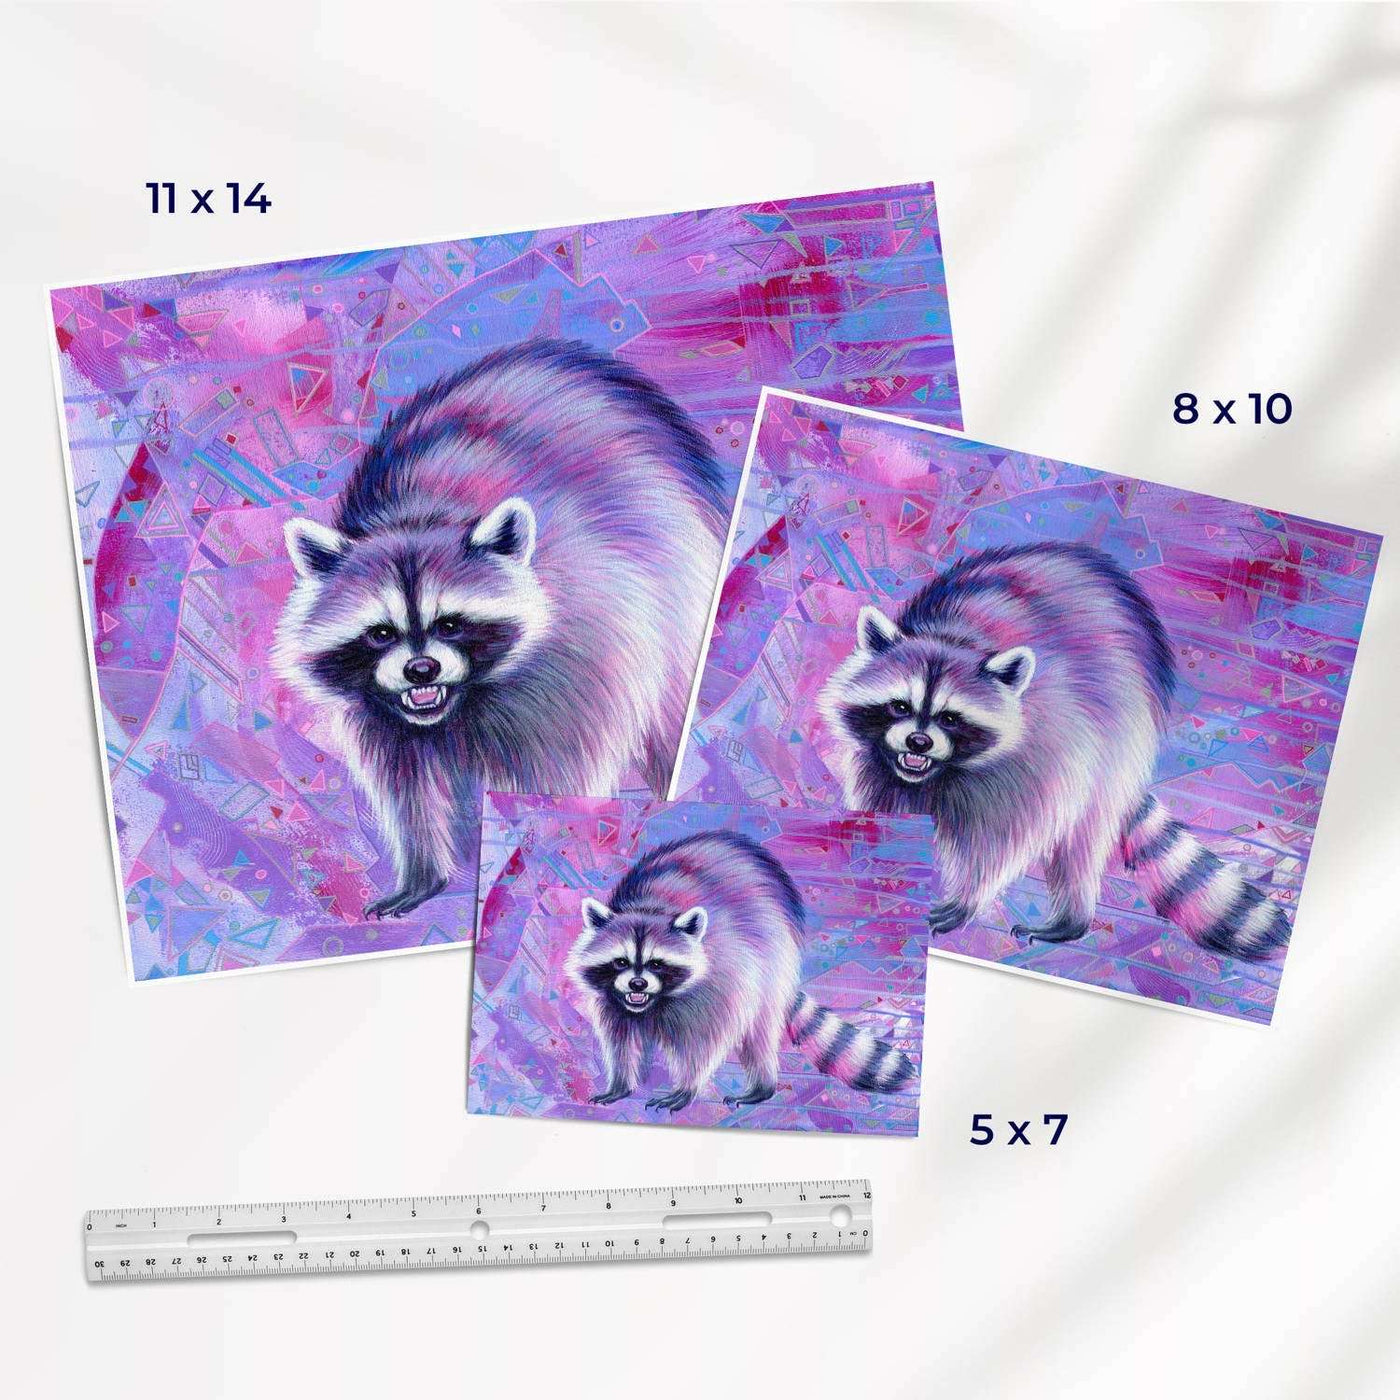 Three Trash Animals - Fine Art prints of a raccoon with a pink and blue abstract background, shown in different sizes (11x14, 8x10, 5x7) next to a ruler for scale.